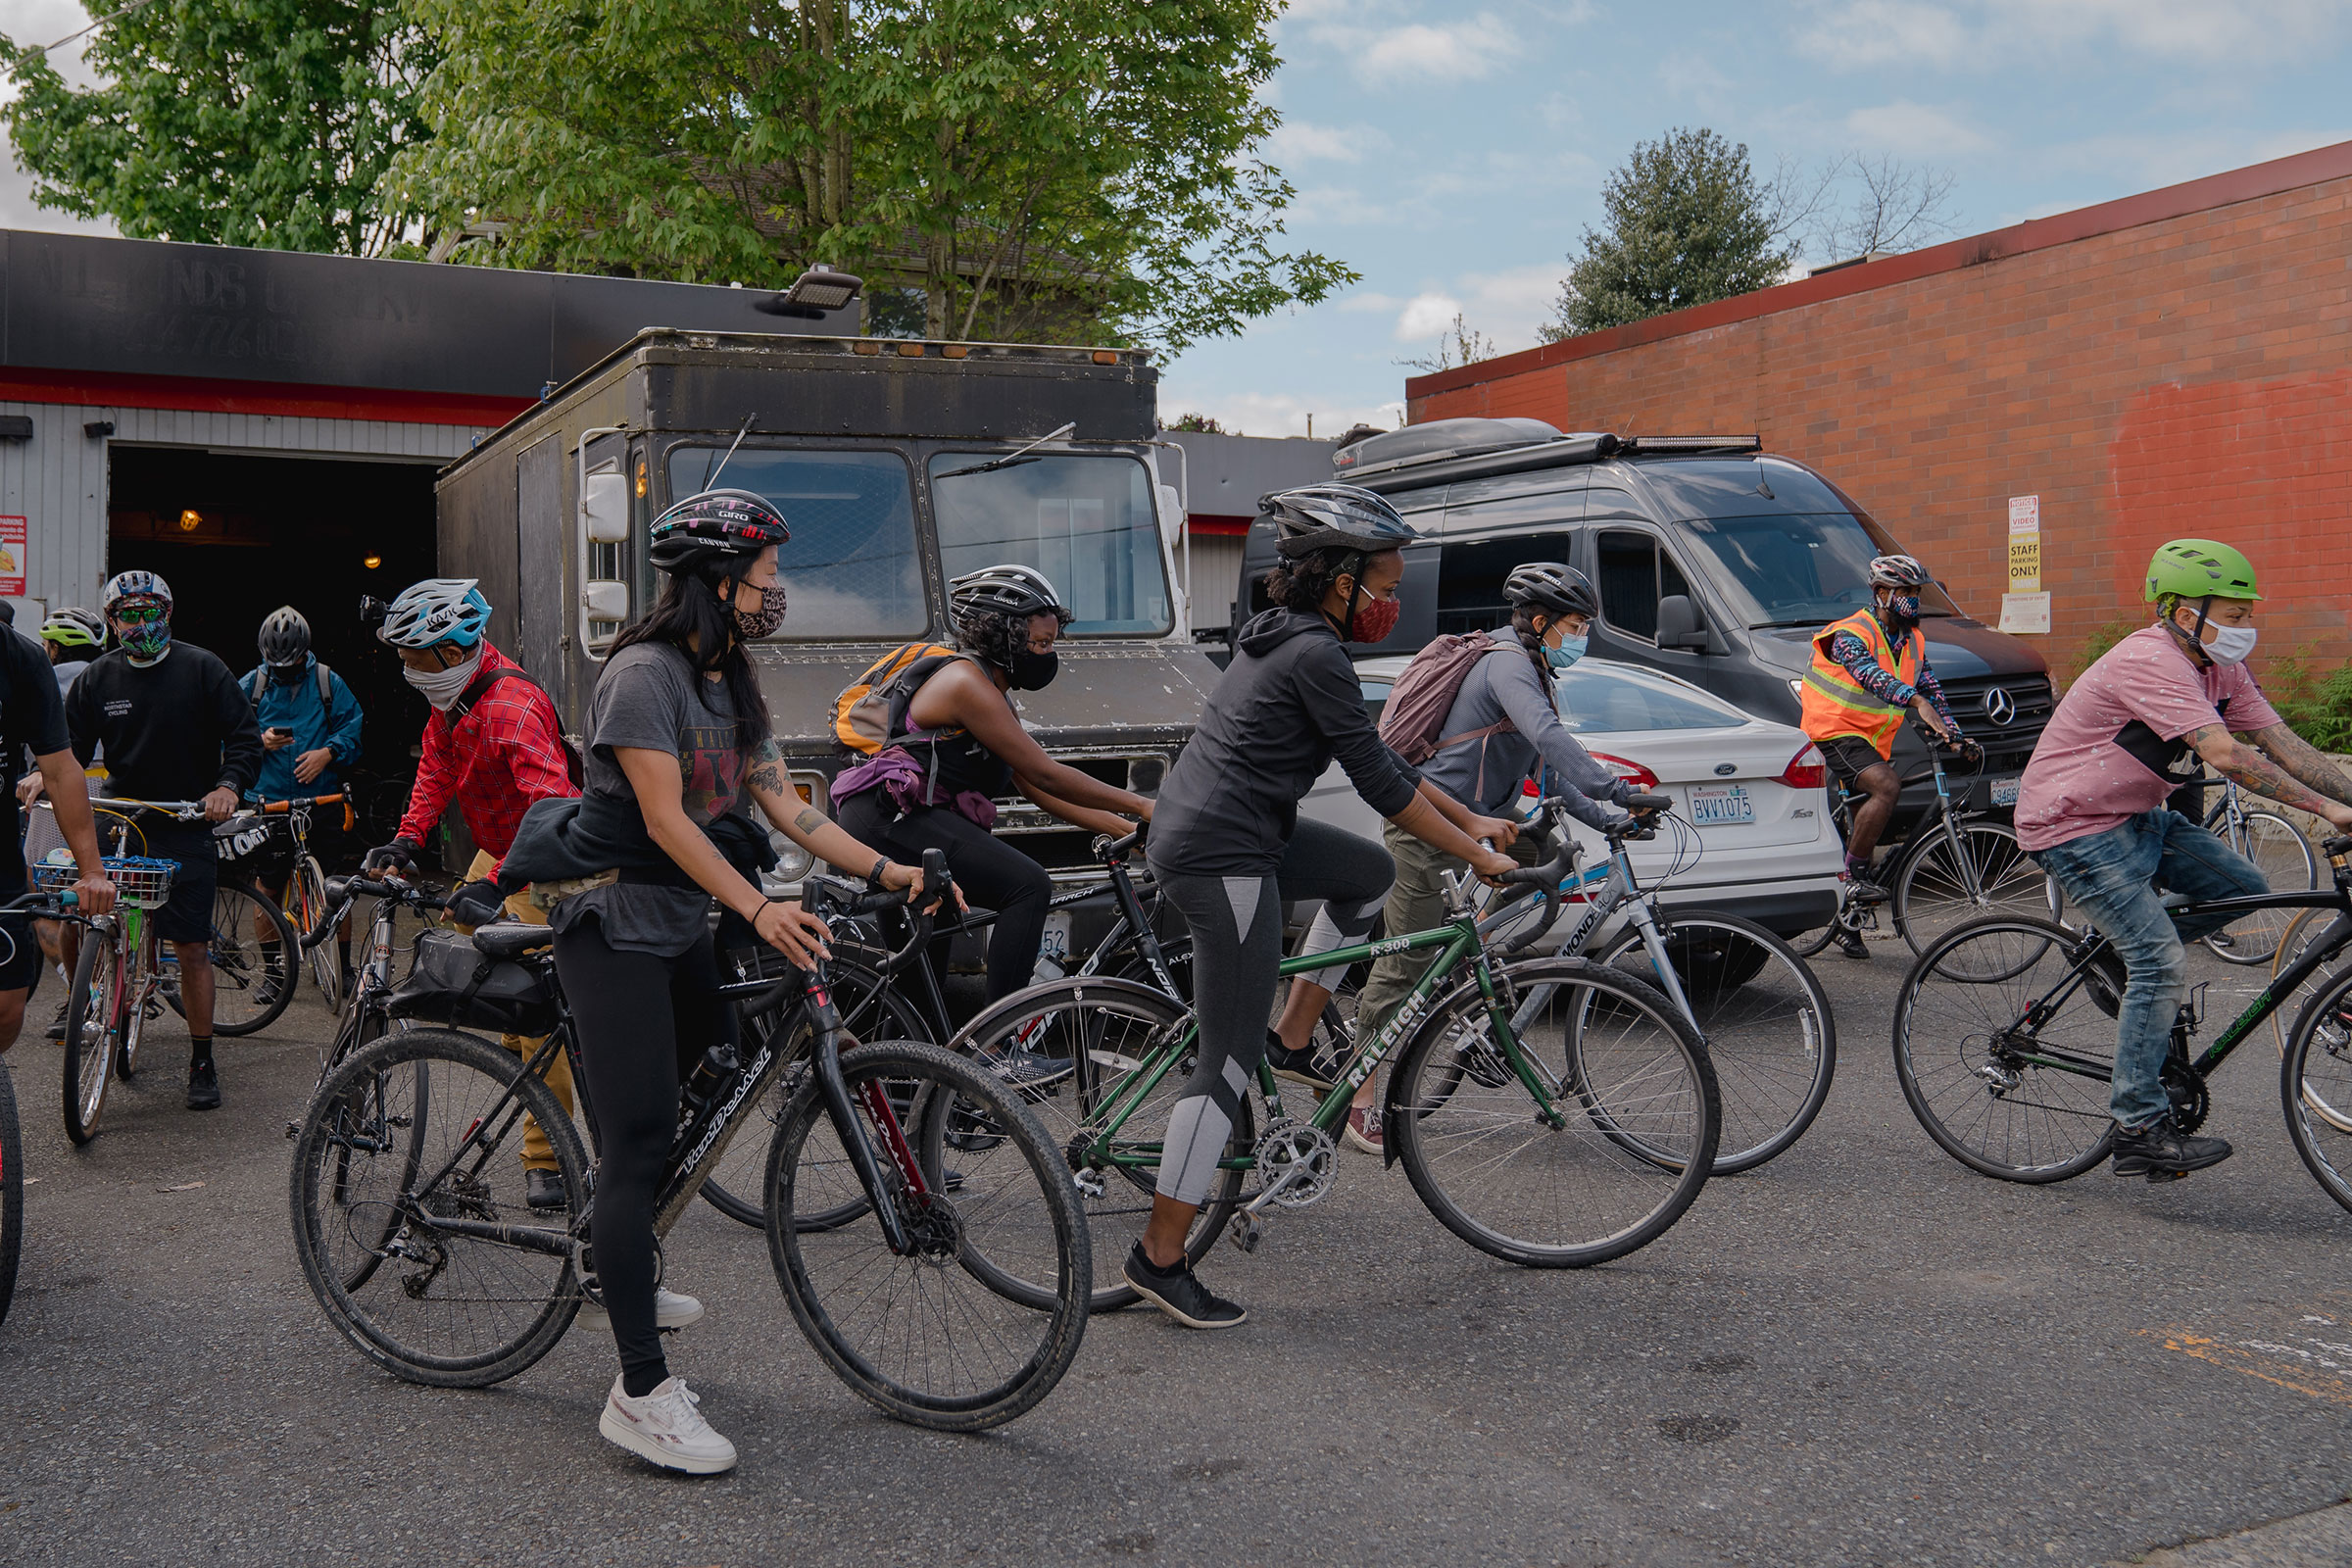 The NorthStar Cycling Club leaves the Central District in Seattle, to ride to Gas Works Park.